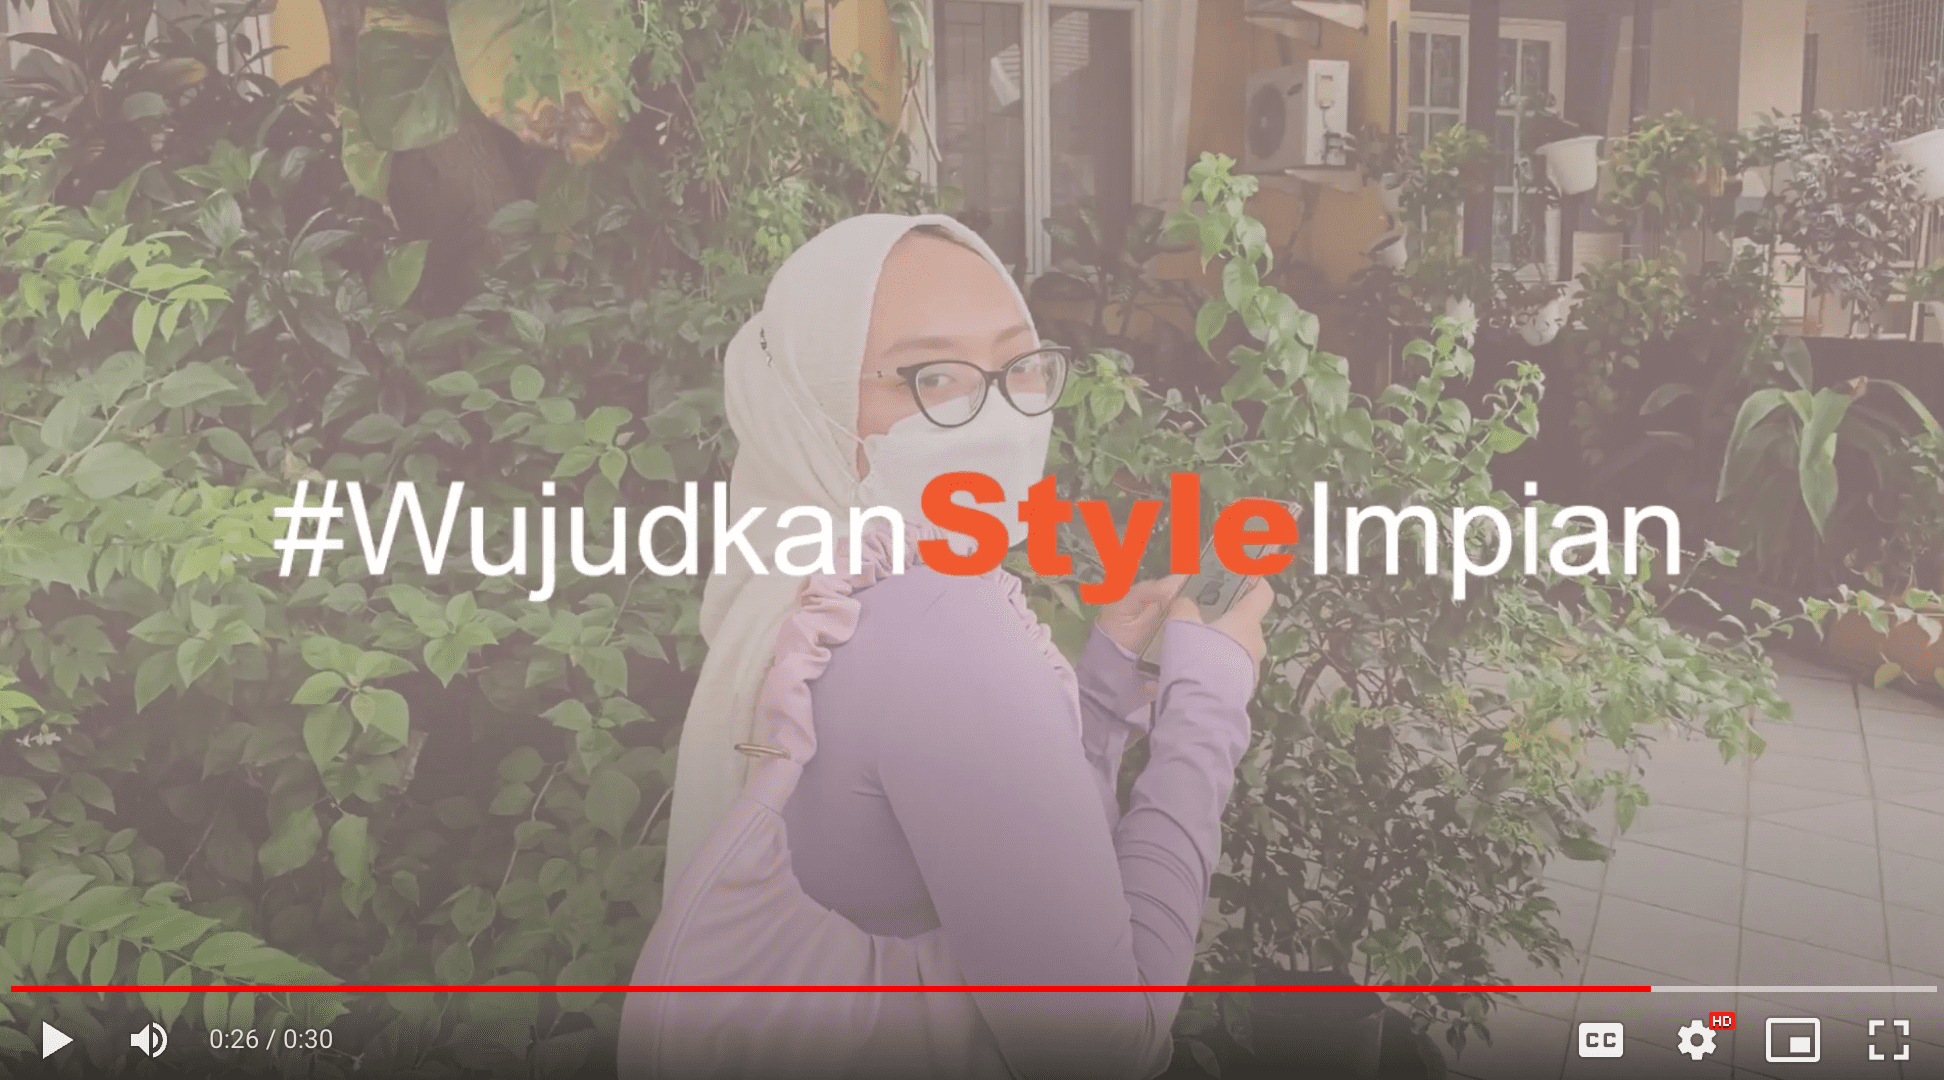 Video Ads & Commercials from rimasyafia